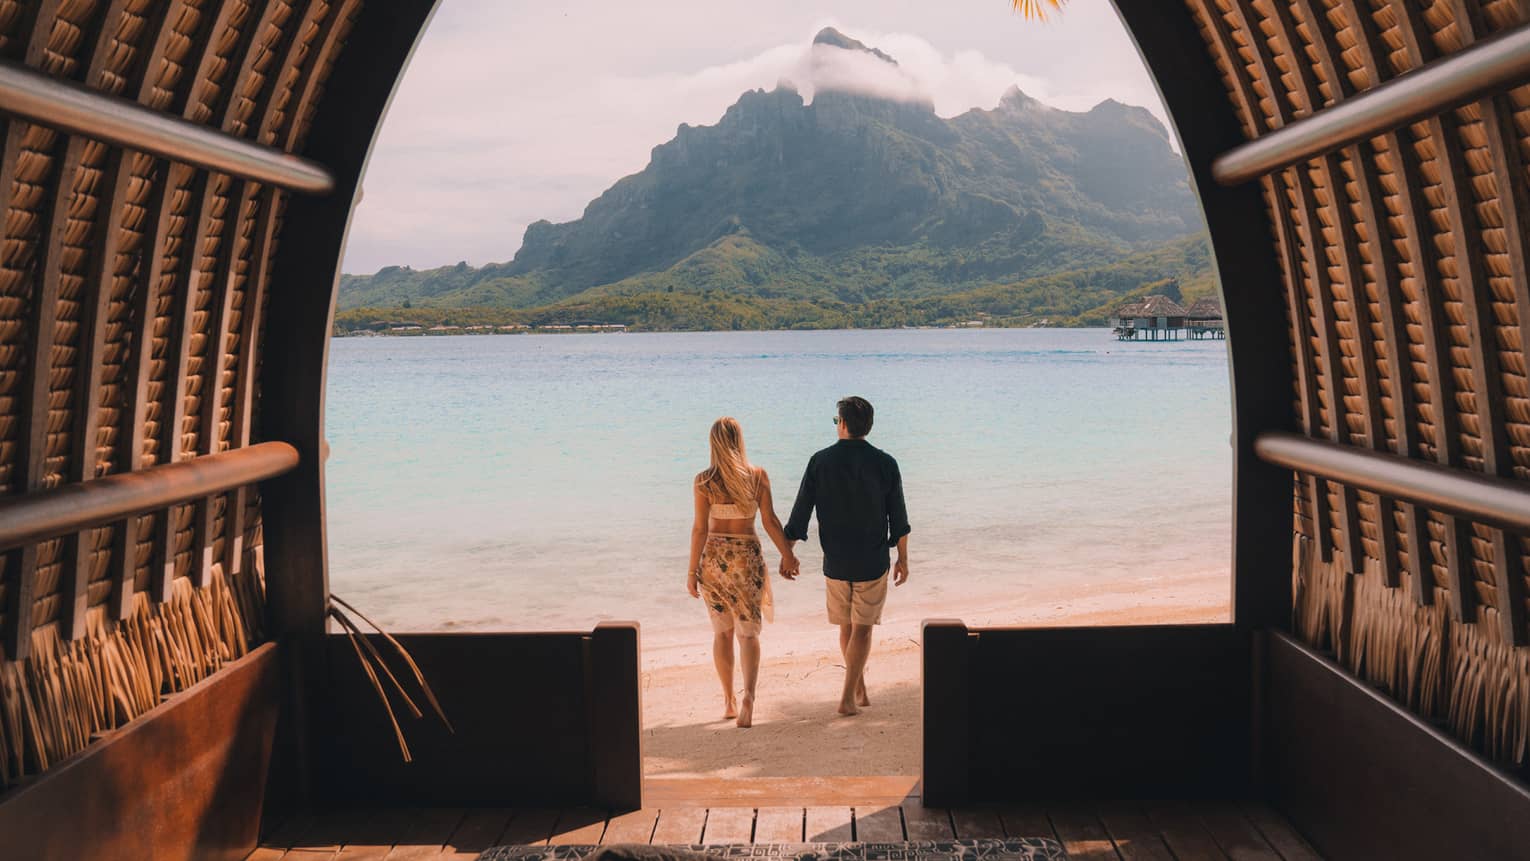 Man and woman on Bora Bora beach hold hands, look out to mountain